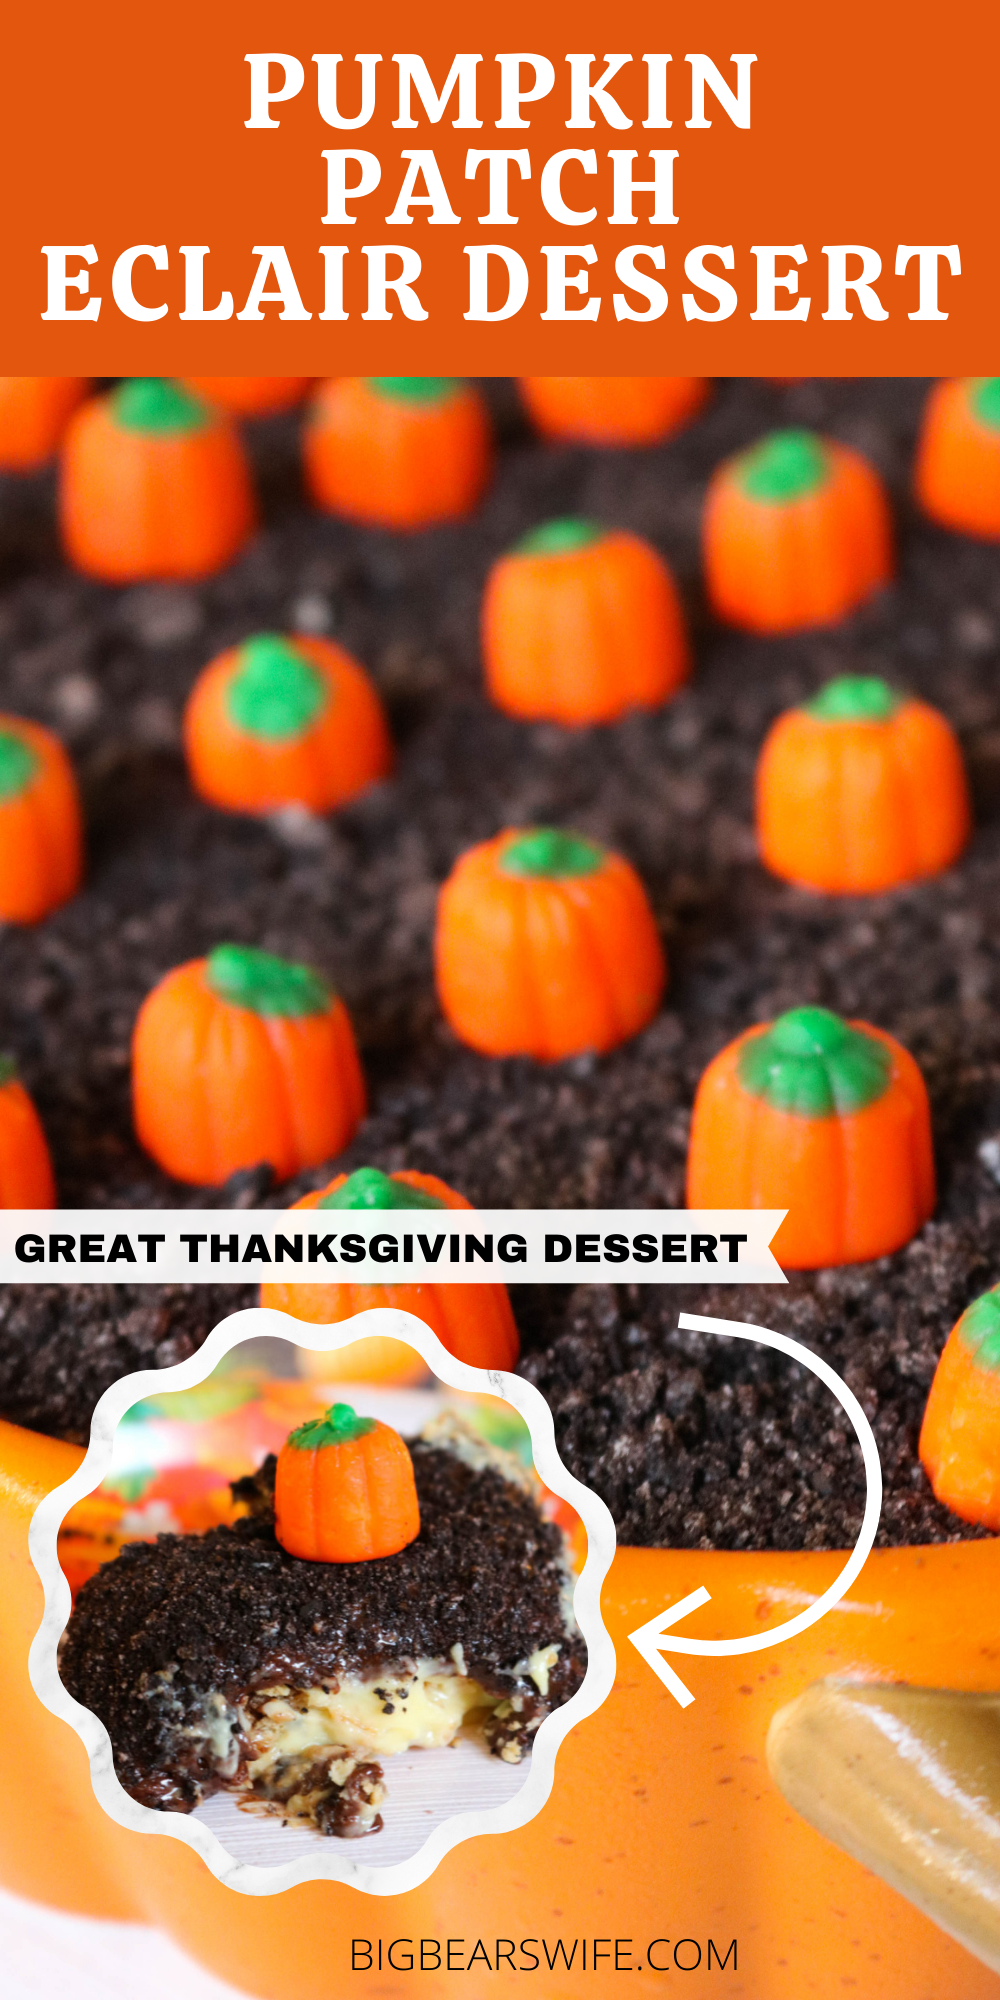 This Pumpkin Patch Eclair Dessert is perfect for any fall party, Halloween or Thanksgiving dinner! It's easy to make and one of our favorites!  via @bigbearswife